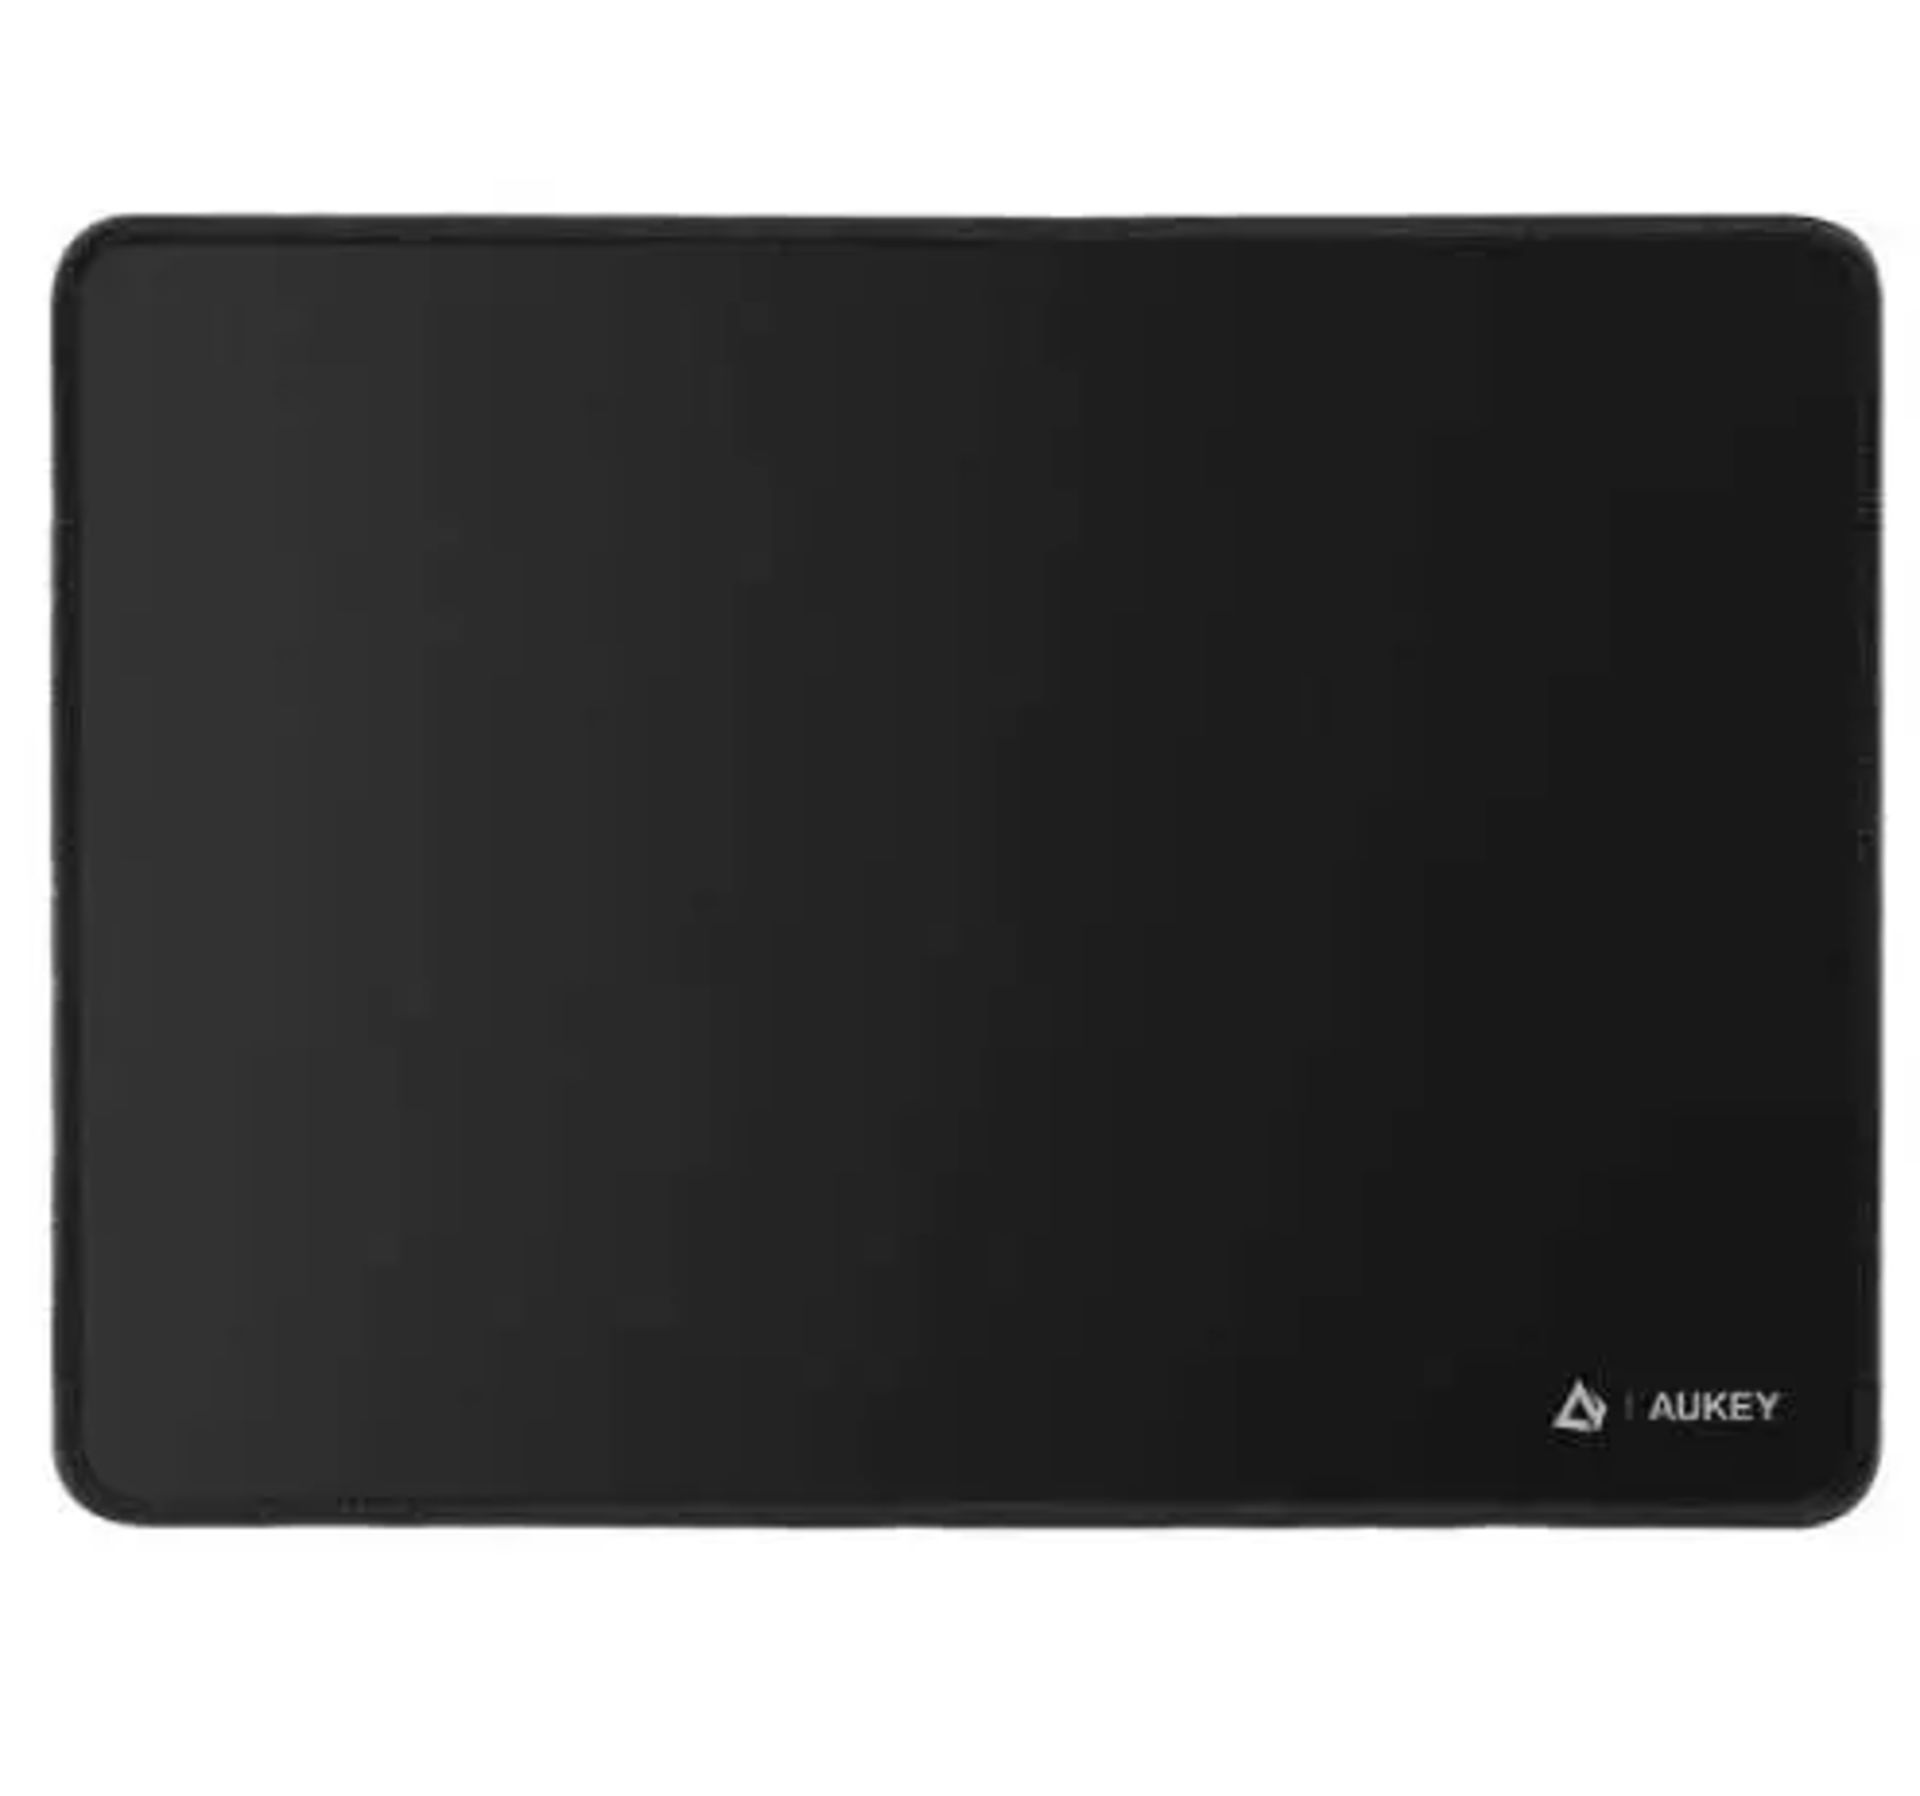 AUKEY KM-P1 MOUSE PAD FOR OFFICE HOME 13.7 X 9.8 IN BLACK 5000 PCS - Bild 2 aus 3